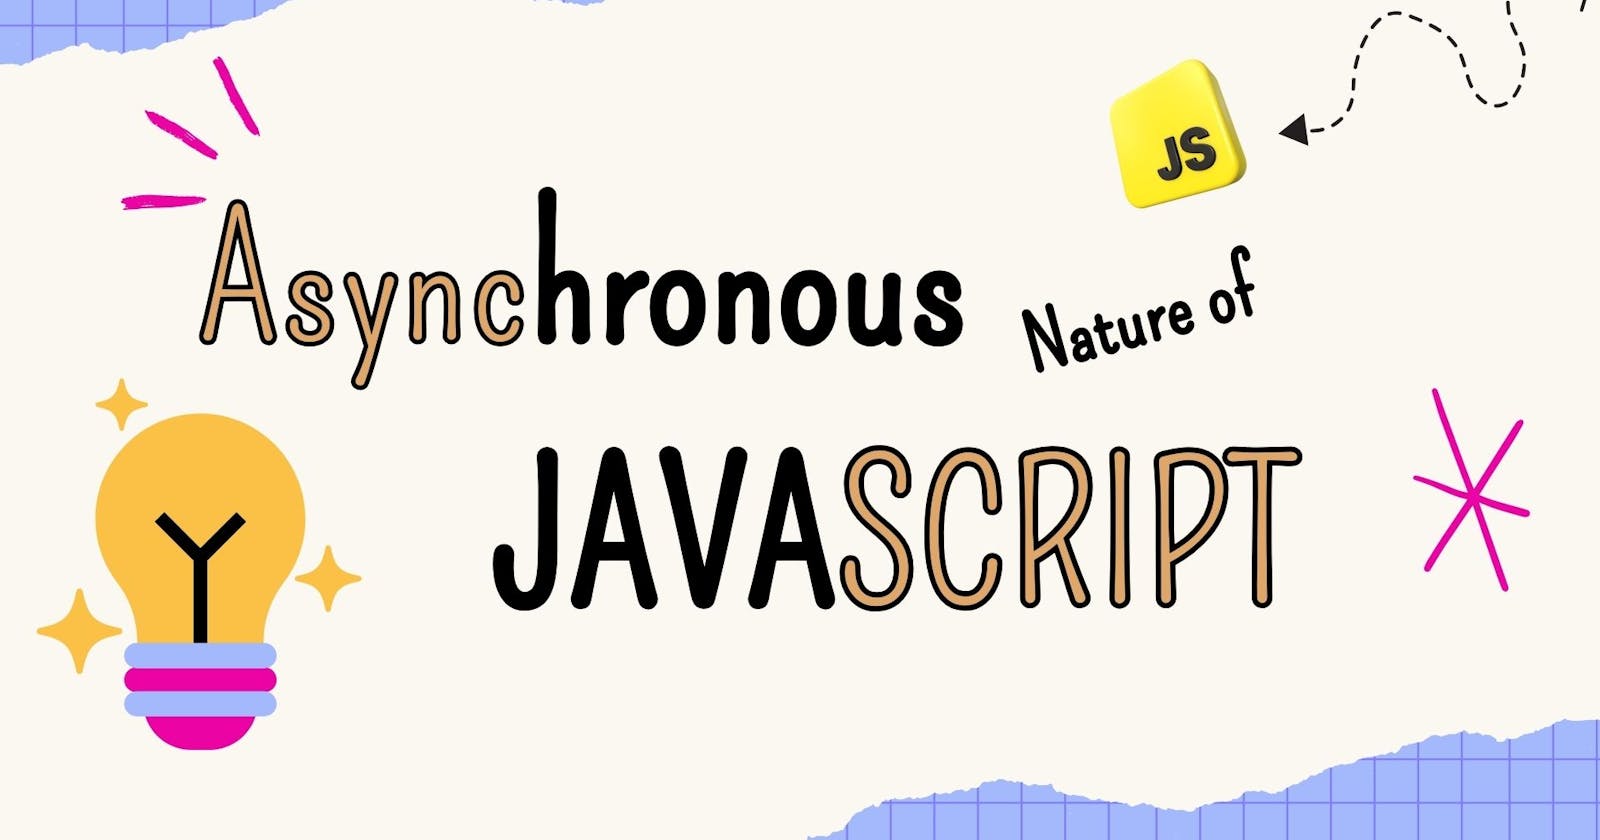 Asynchronous Nature of JavaScript